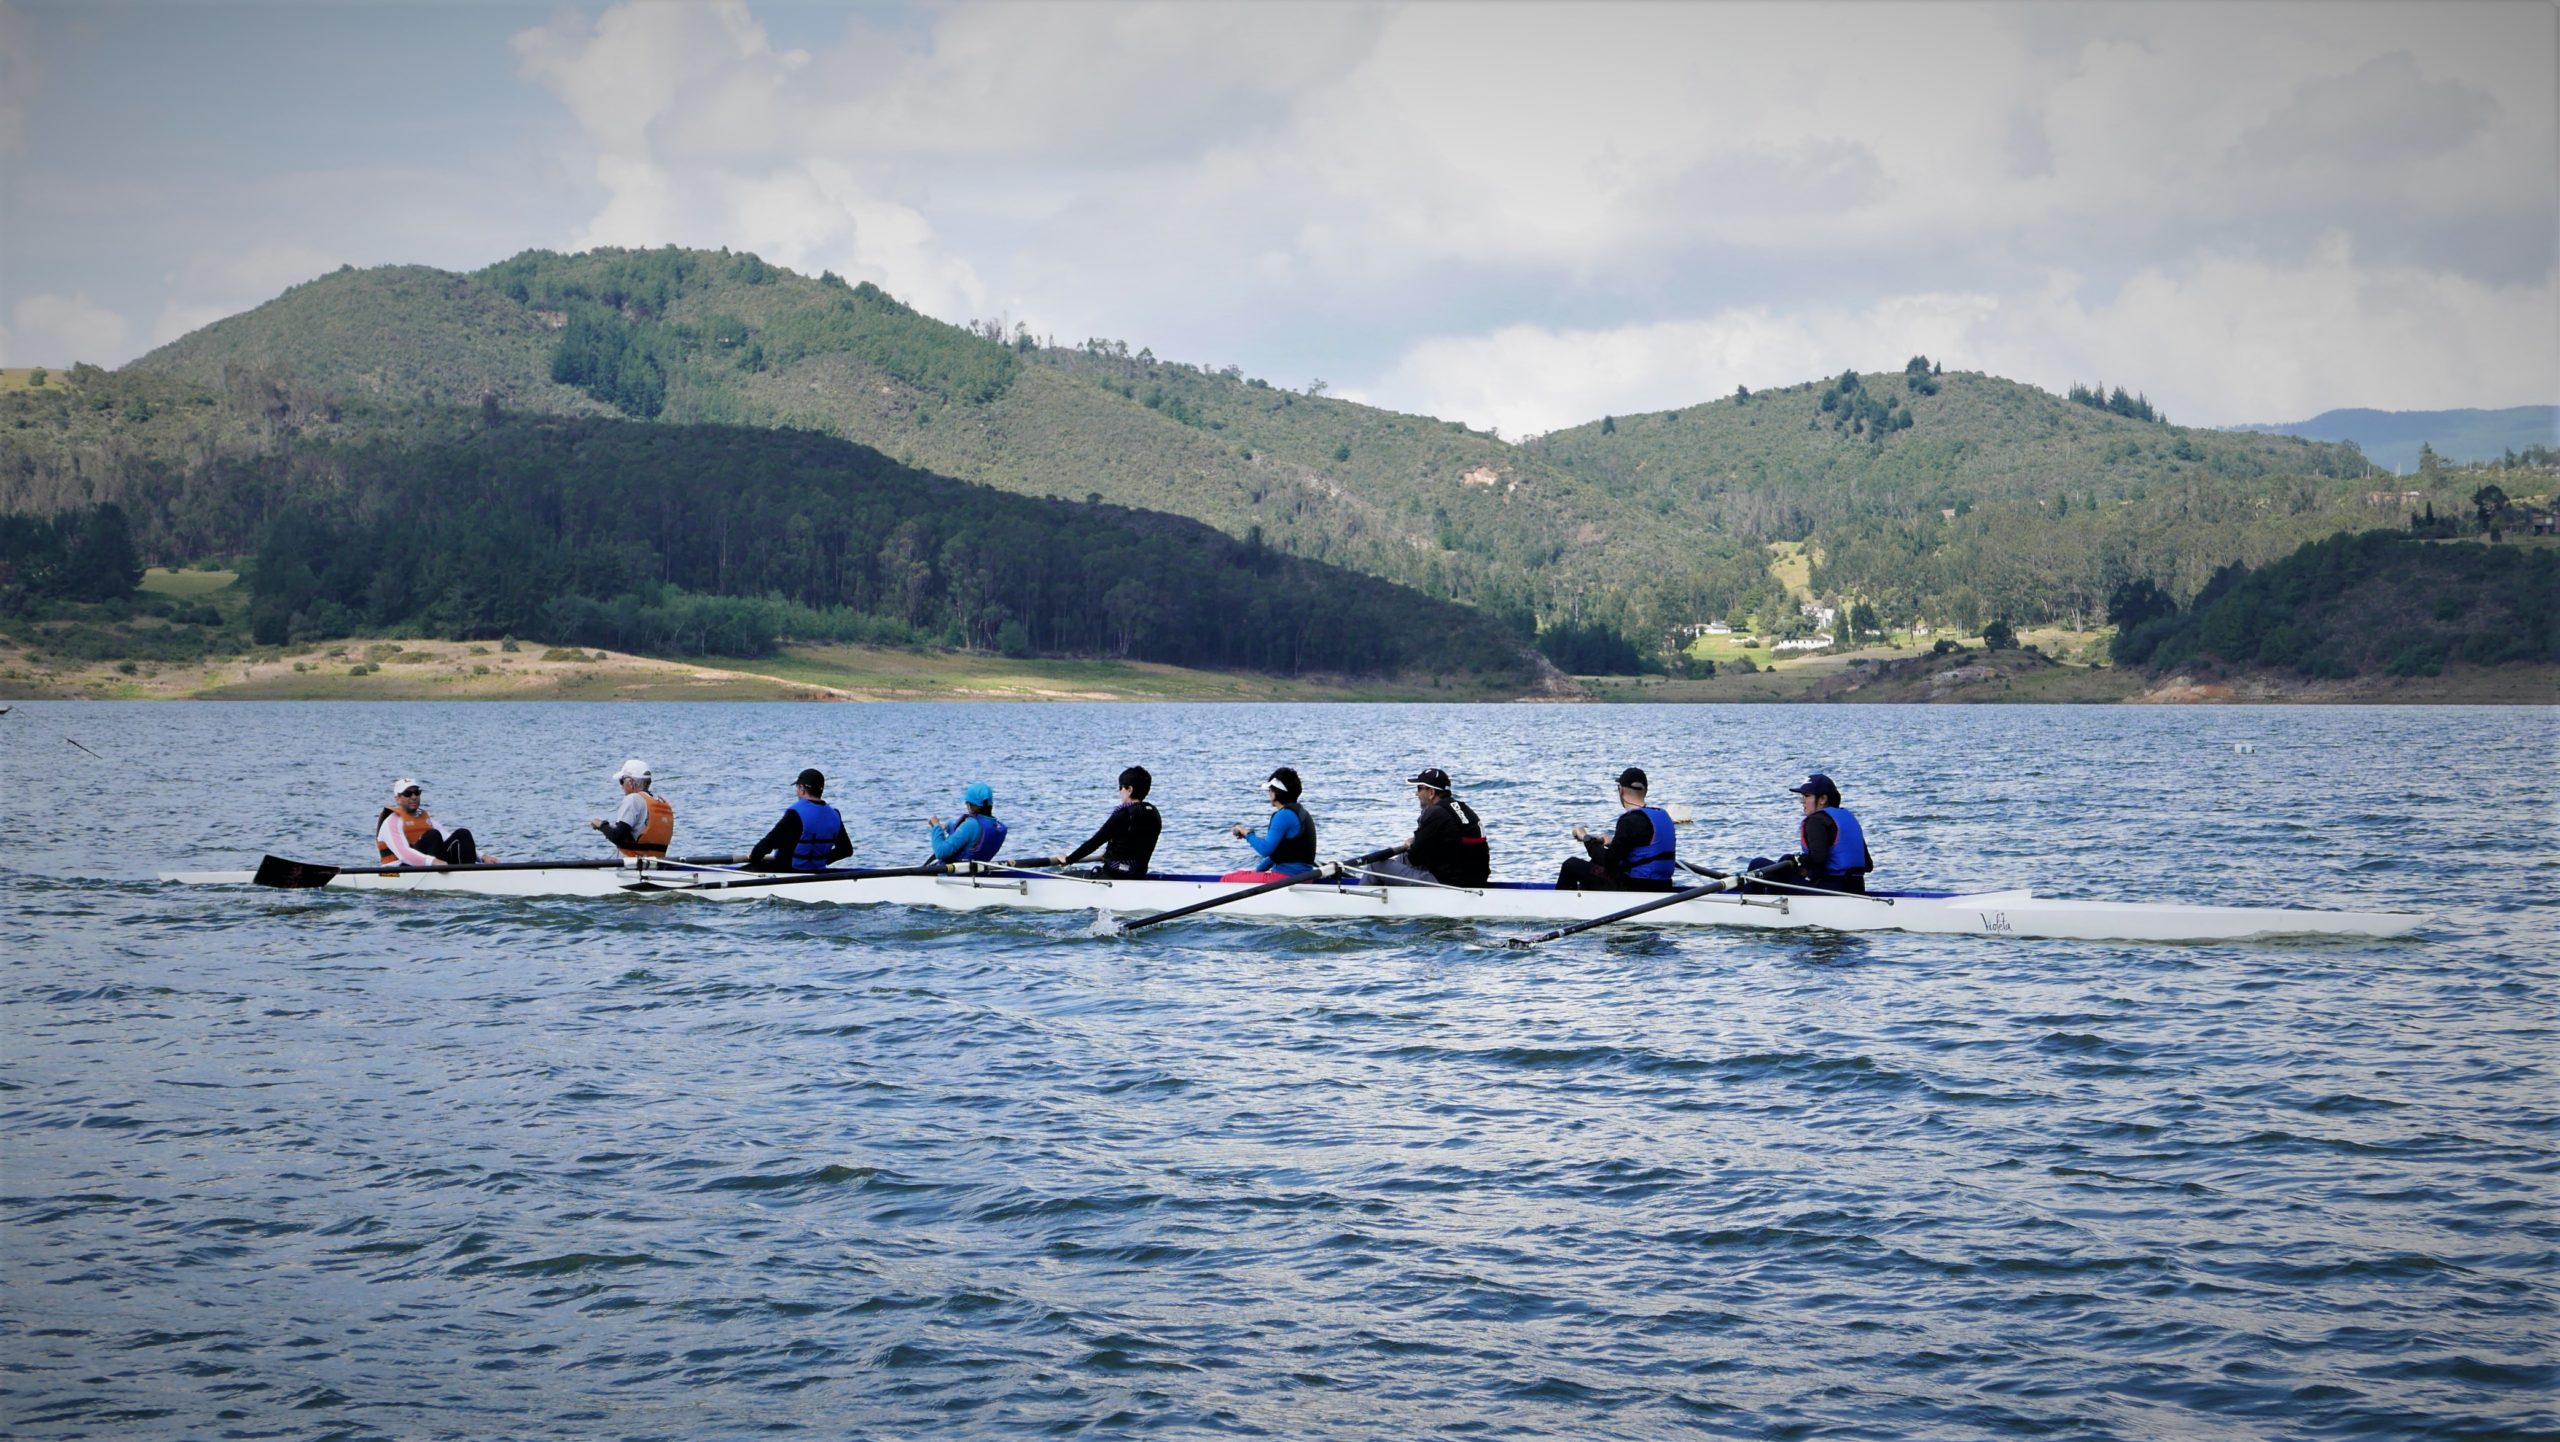 The Bogota Rowing Club has its base at Club Nautica Muña, with practices early on Sundays. Novices can do a five-session 'taster' course. The club has singles, 2s, 4s and 8s, and holds fun races on the lake. Some more serious rowers actually attend international events. See below for contacts.